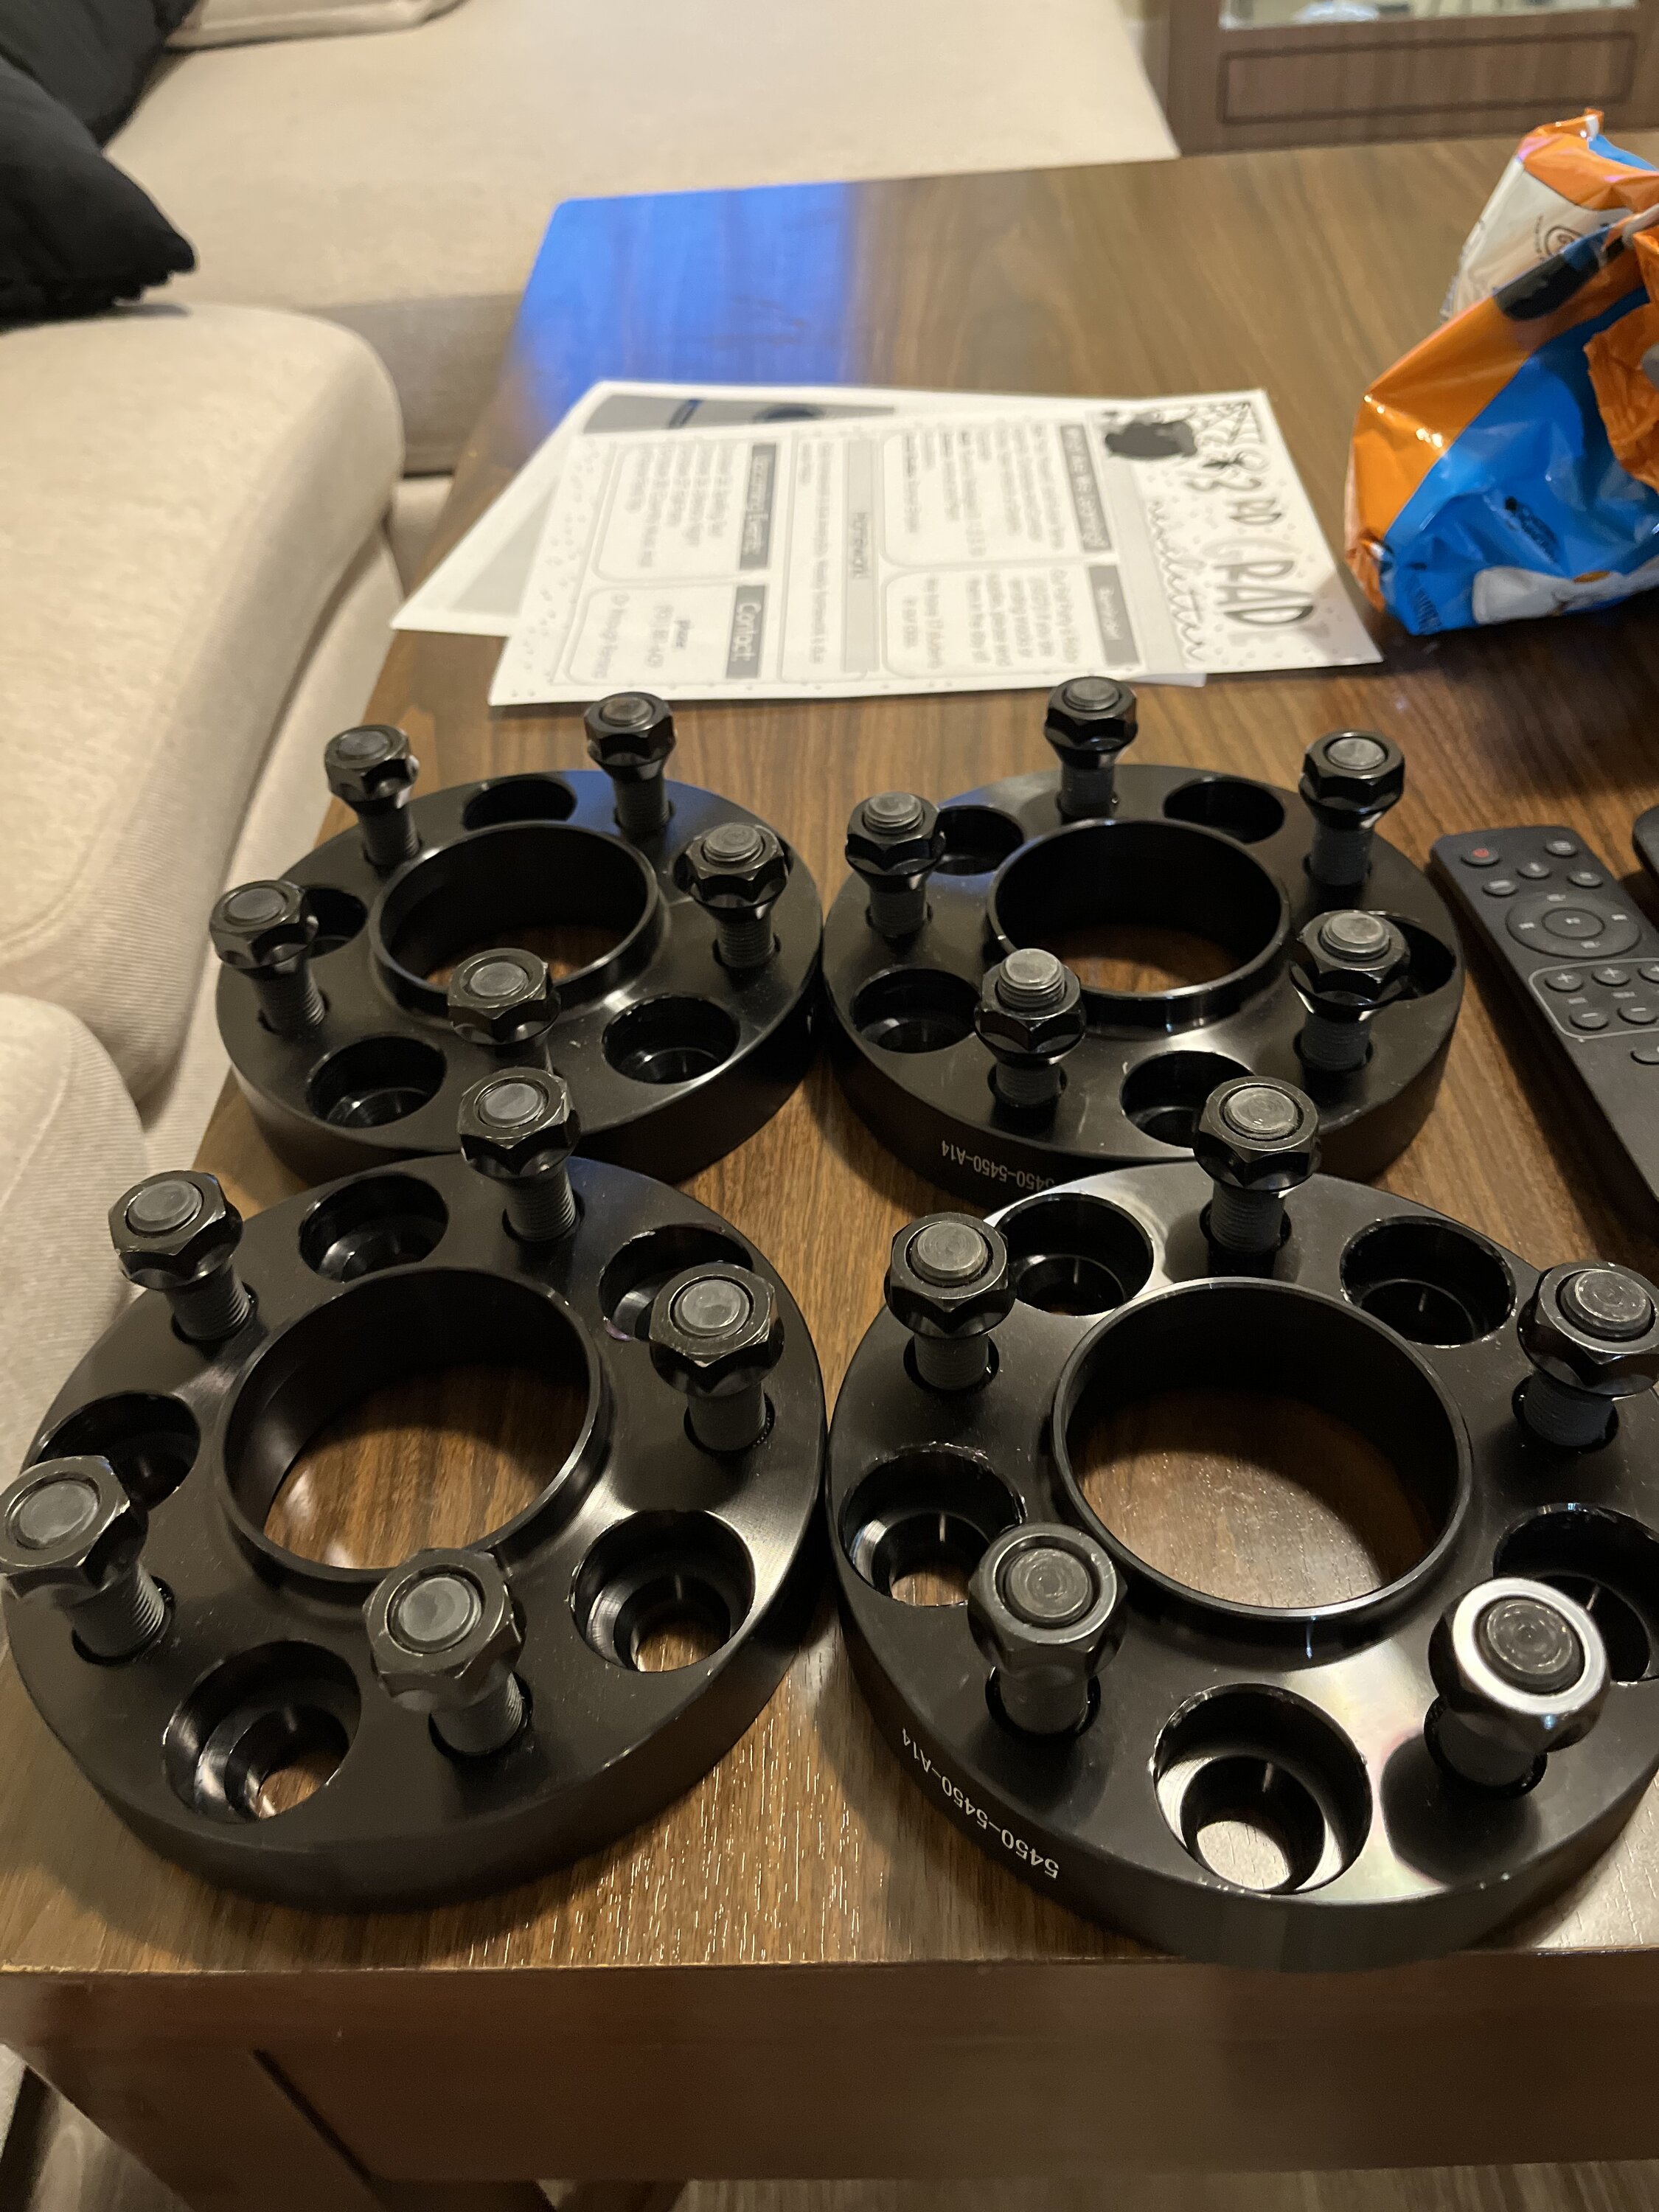 S650 Mustang Wheel Spacers!! 71979508203__18519022-3560-433B-821A-3E0C419CCB68